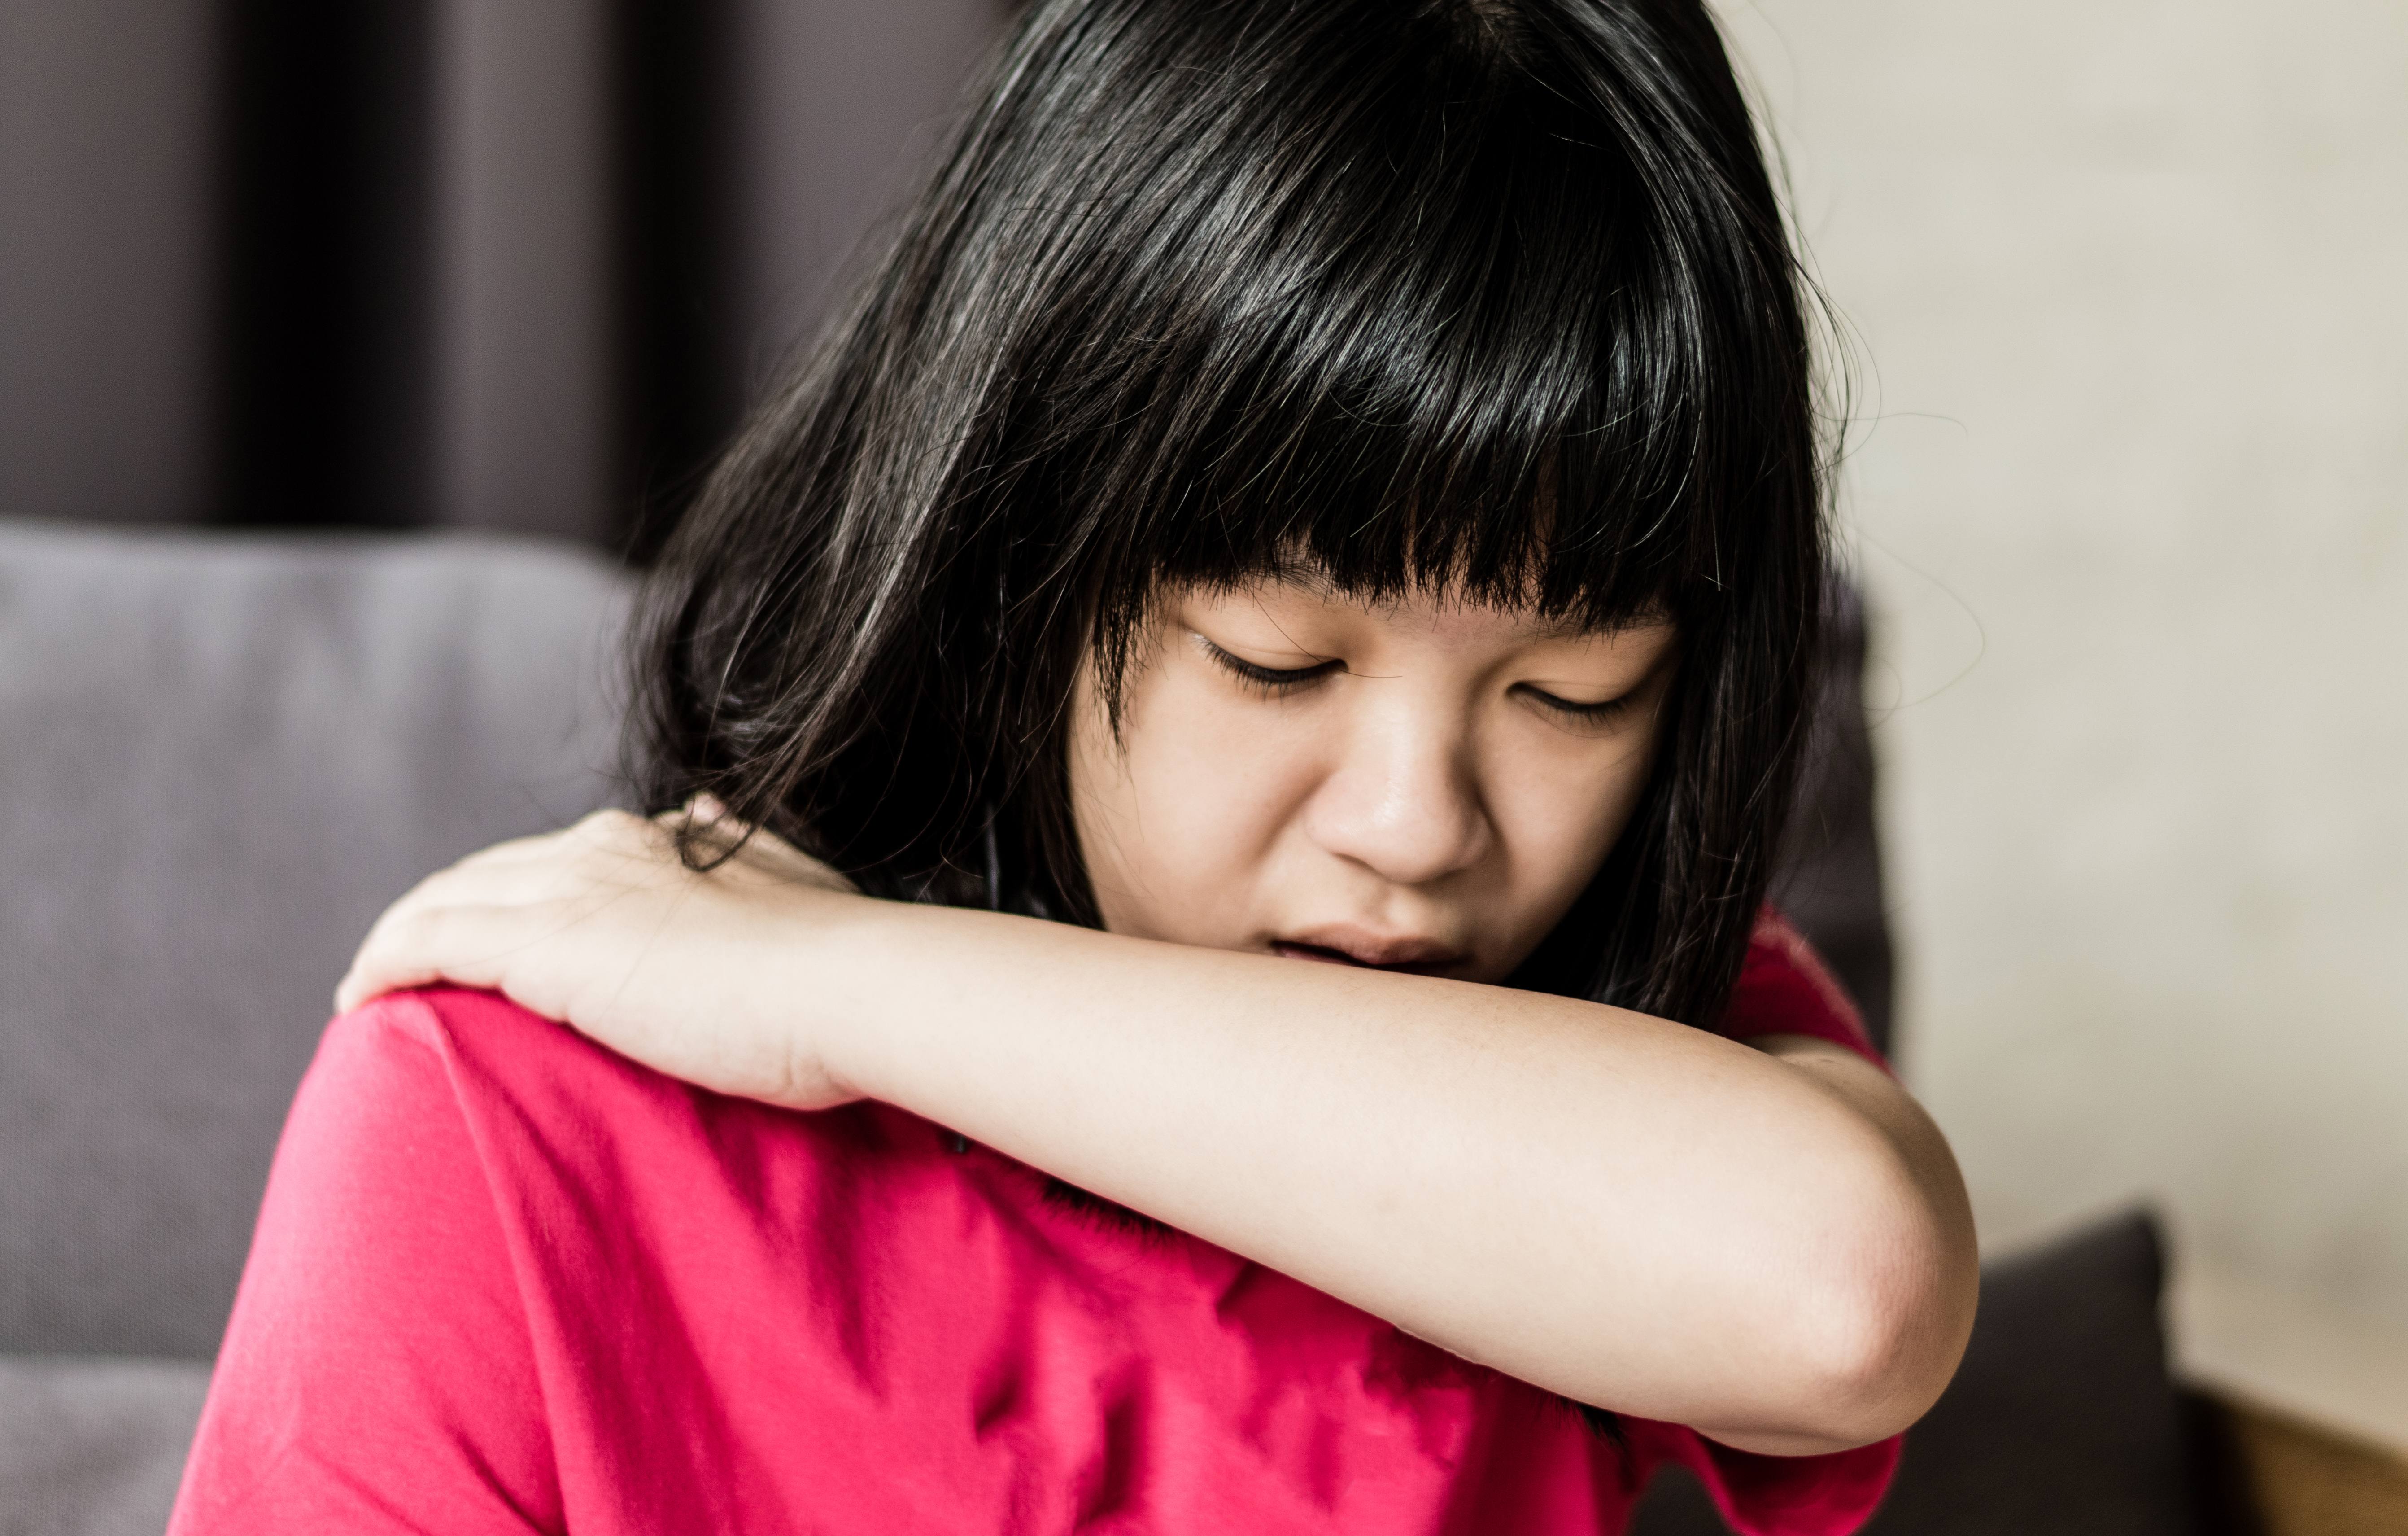 a young Asian girl who might be sick with a cold or the flu, is coughing into her elbow